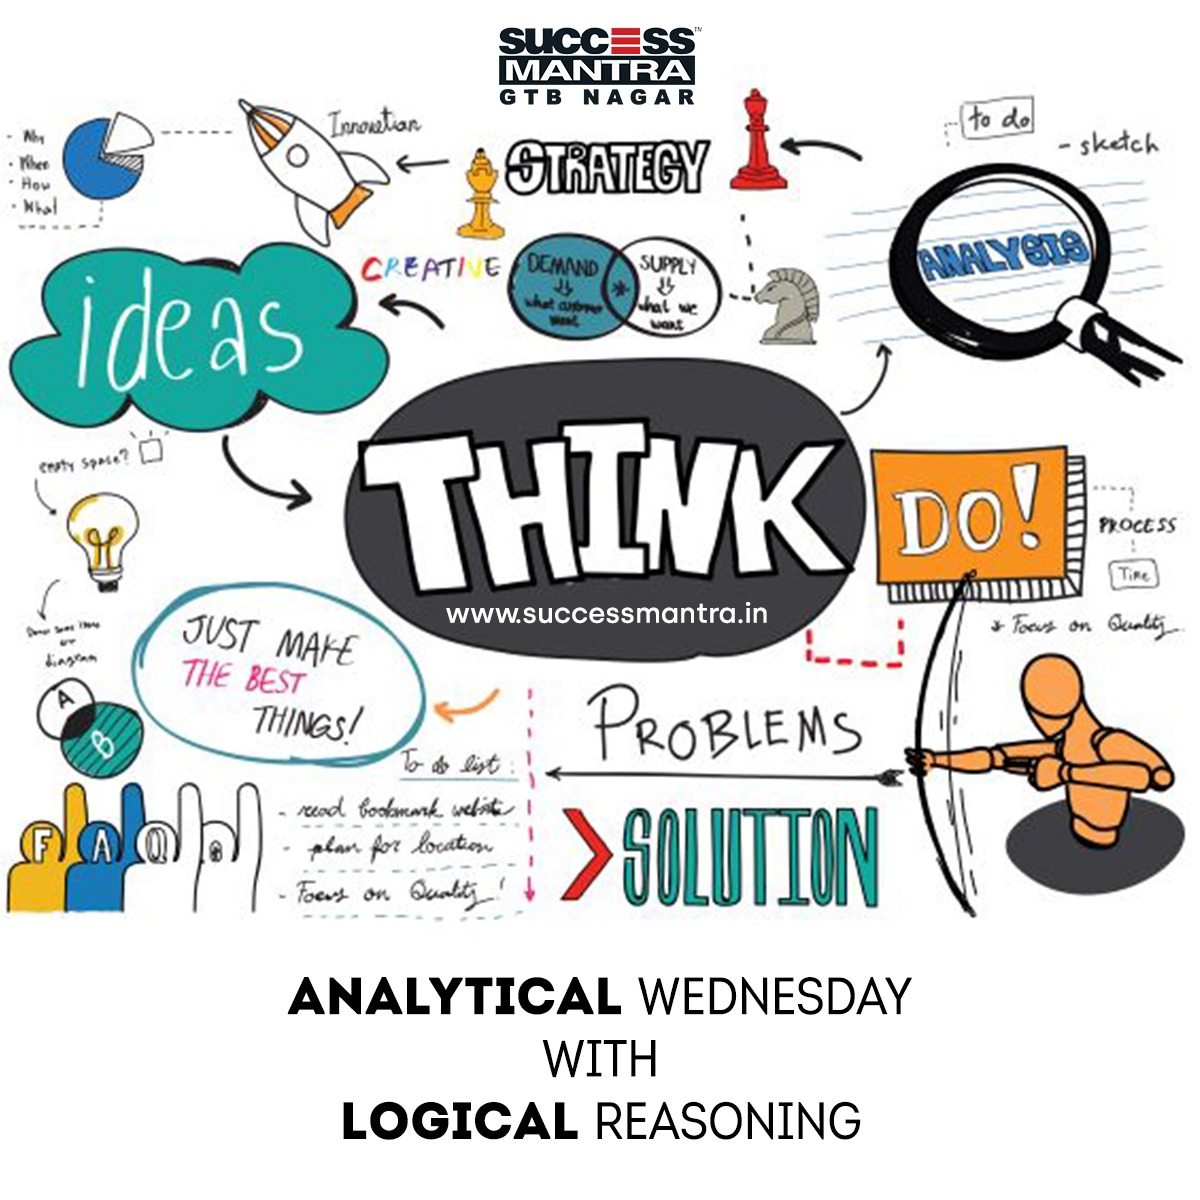 Questions on Logical Reasoning SMLRQ034